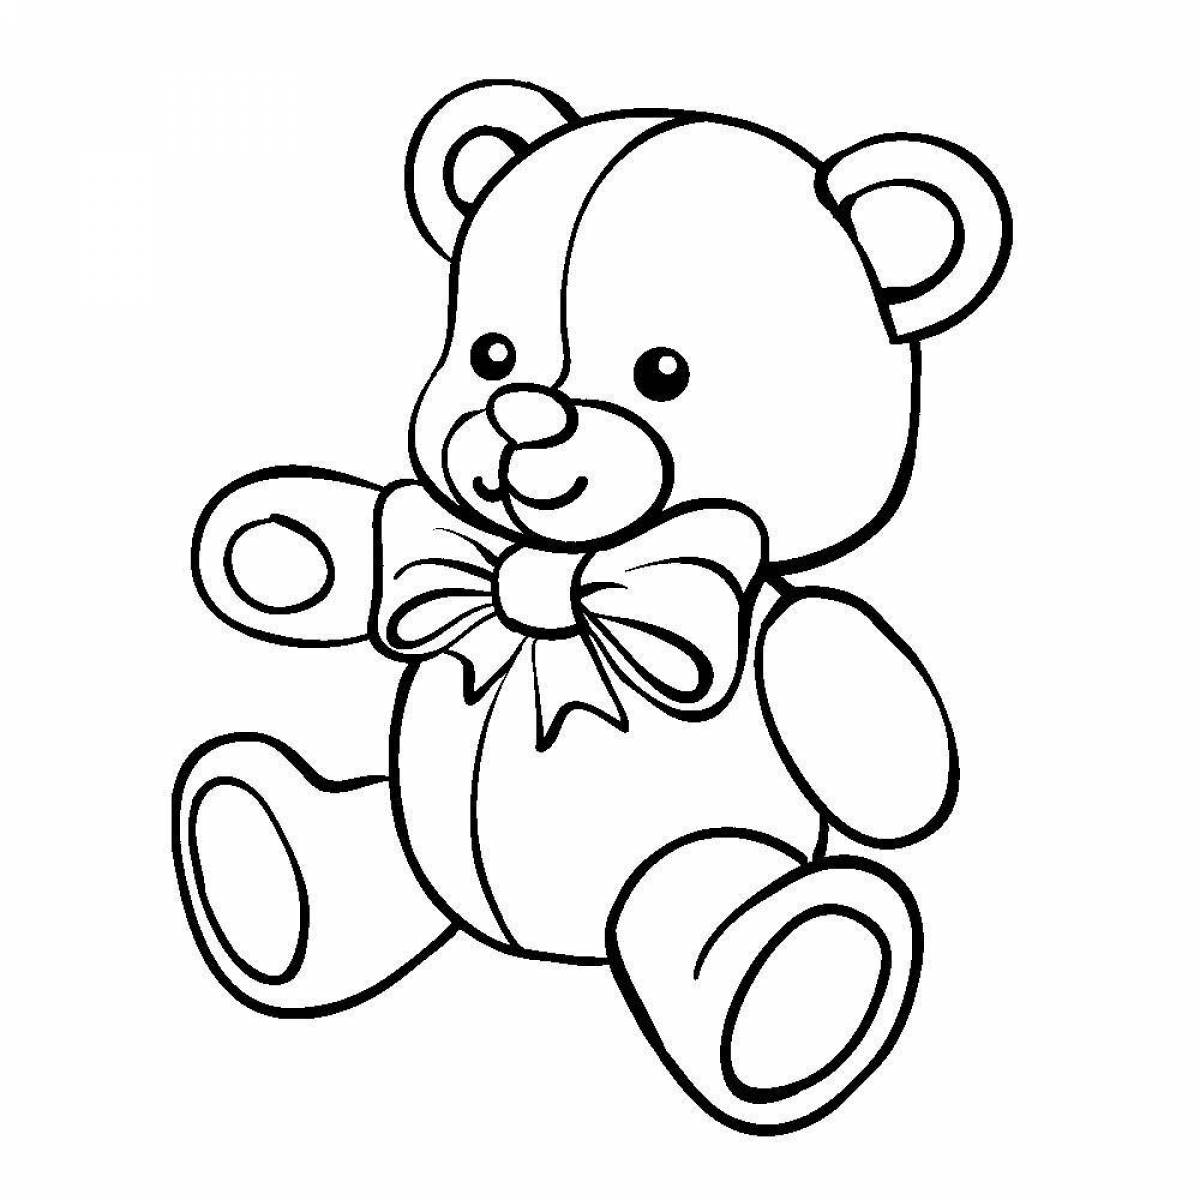 Exciting teddy bear coloring book